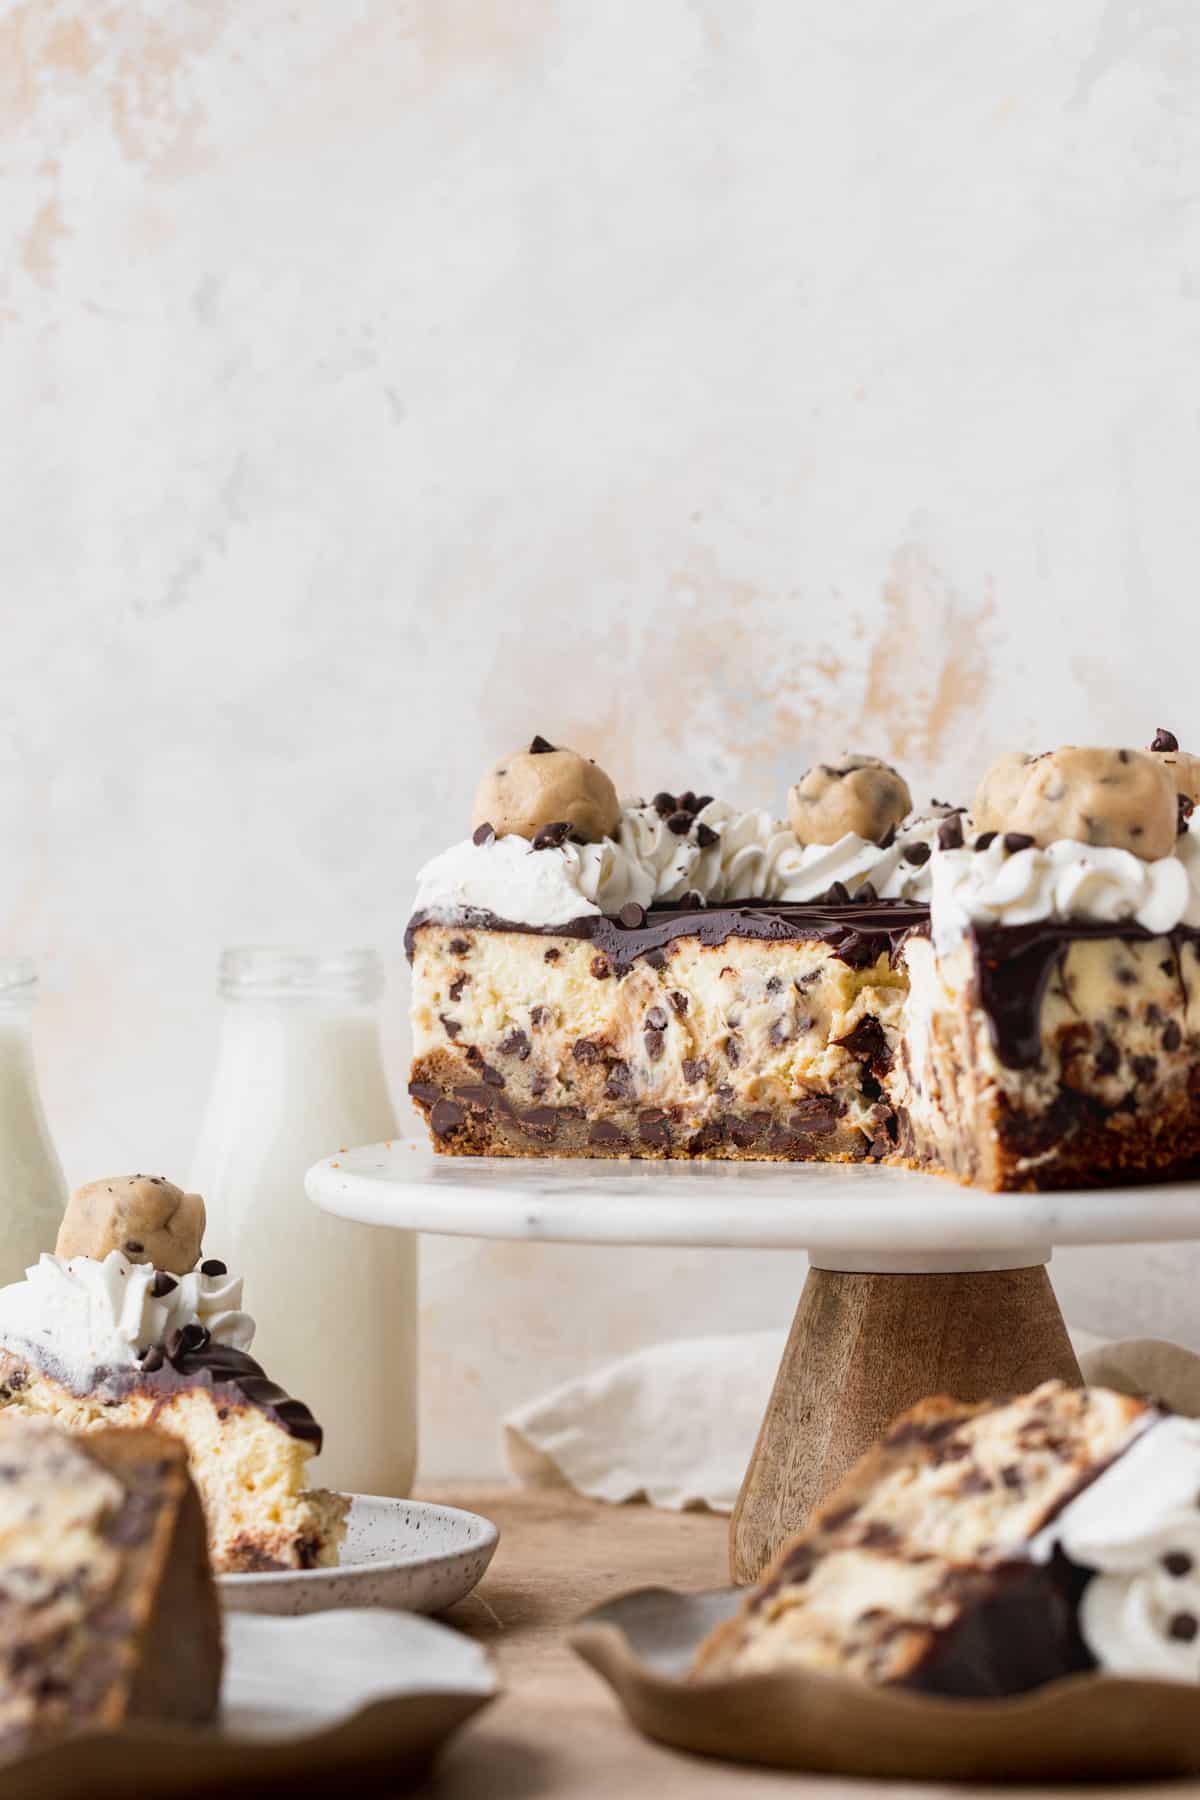 Chocolate chip cookie dough cheesecake on a cake stand.